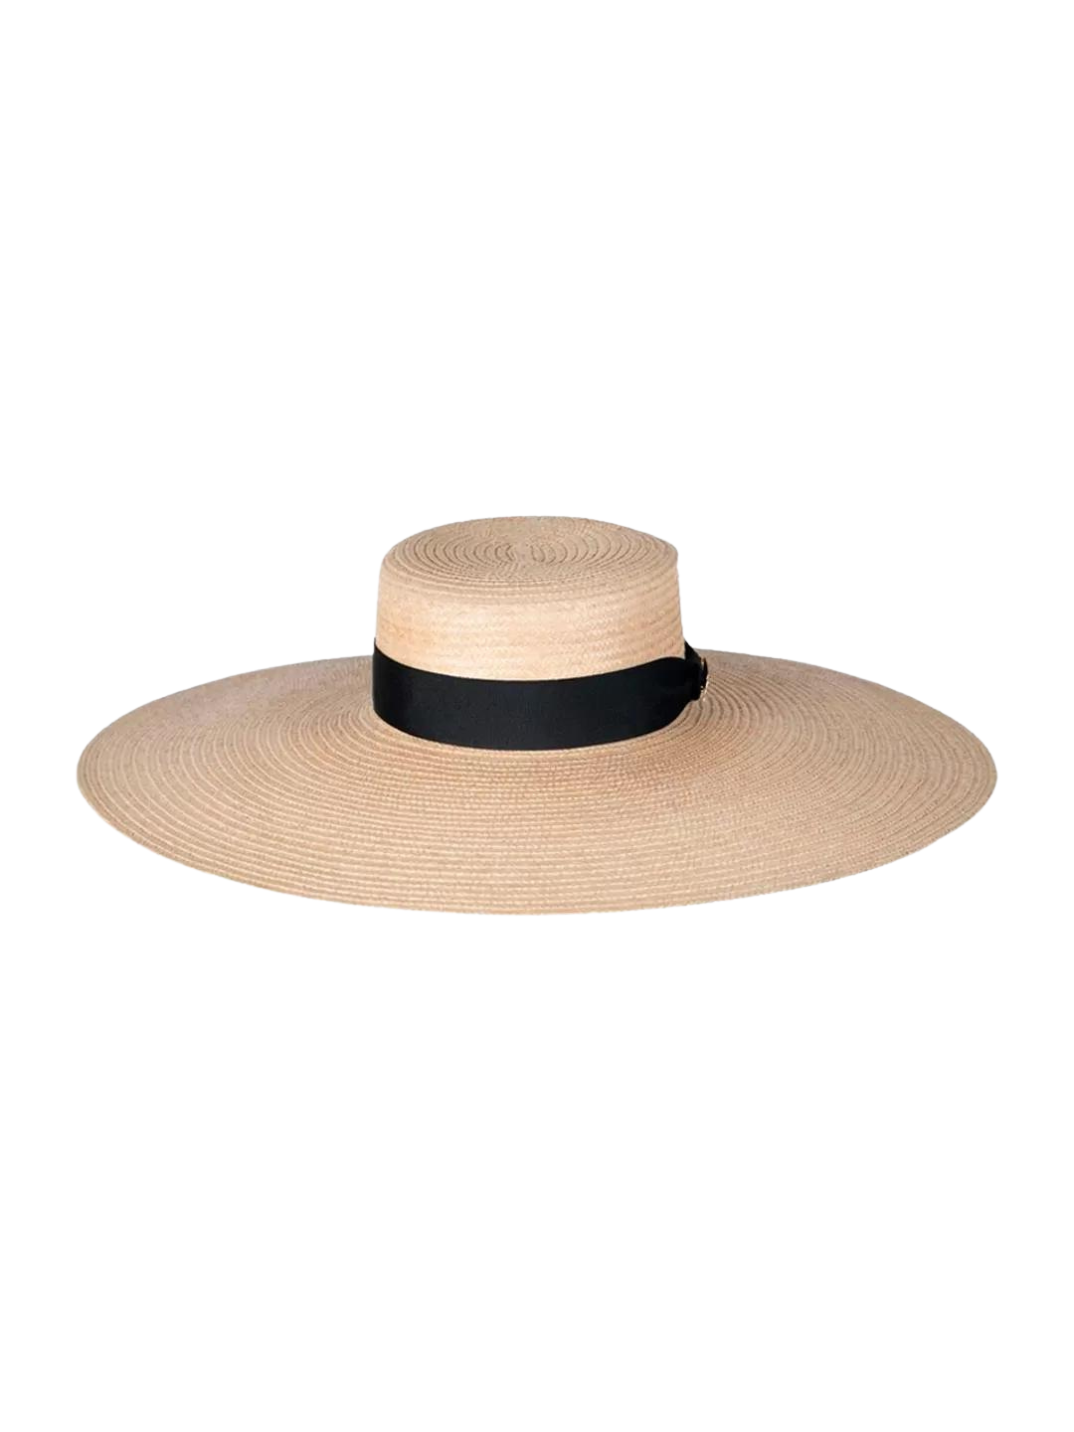 natural straw hat extra large wide brim handcrafted in Colombia sustainable fashion brand